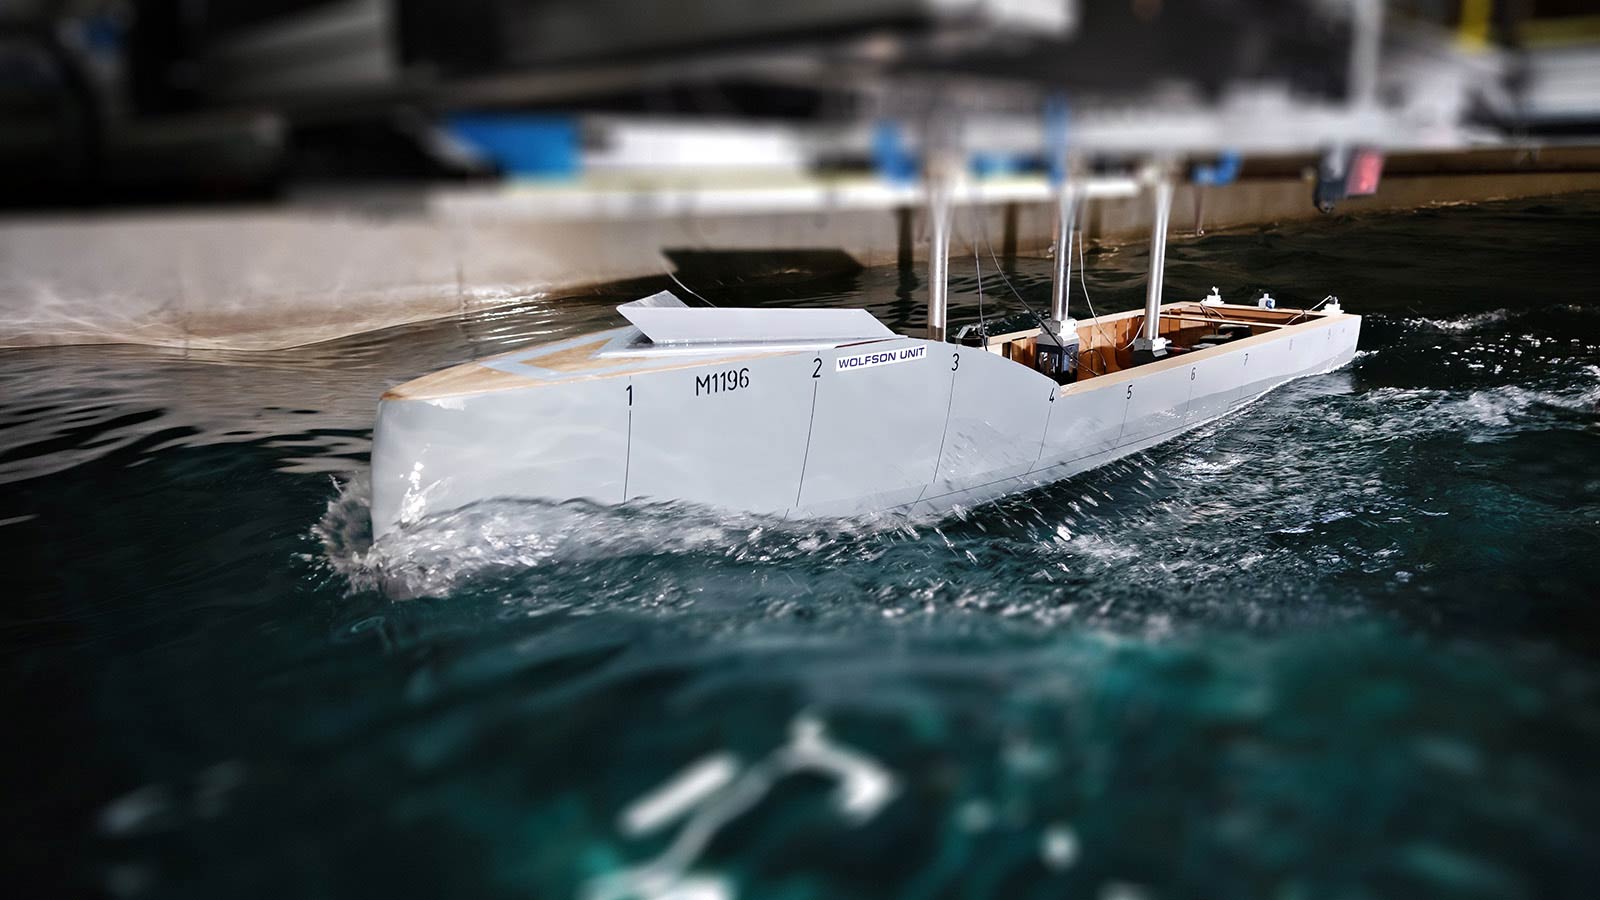 YN 20857 Project Setteesettanta, 57m full-custom motor yacht: hull tests completed